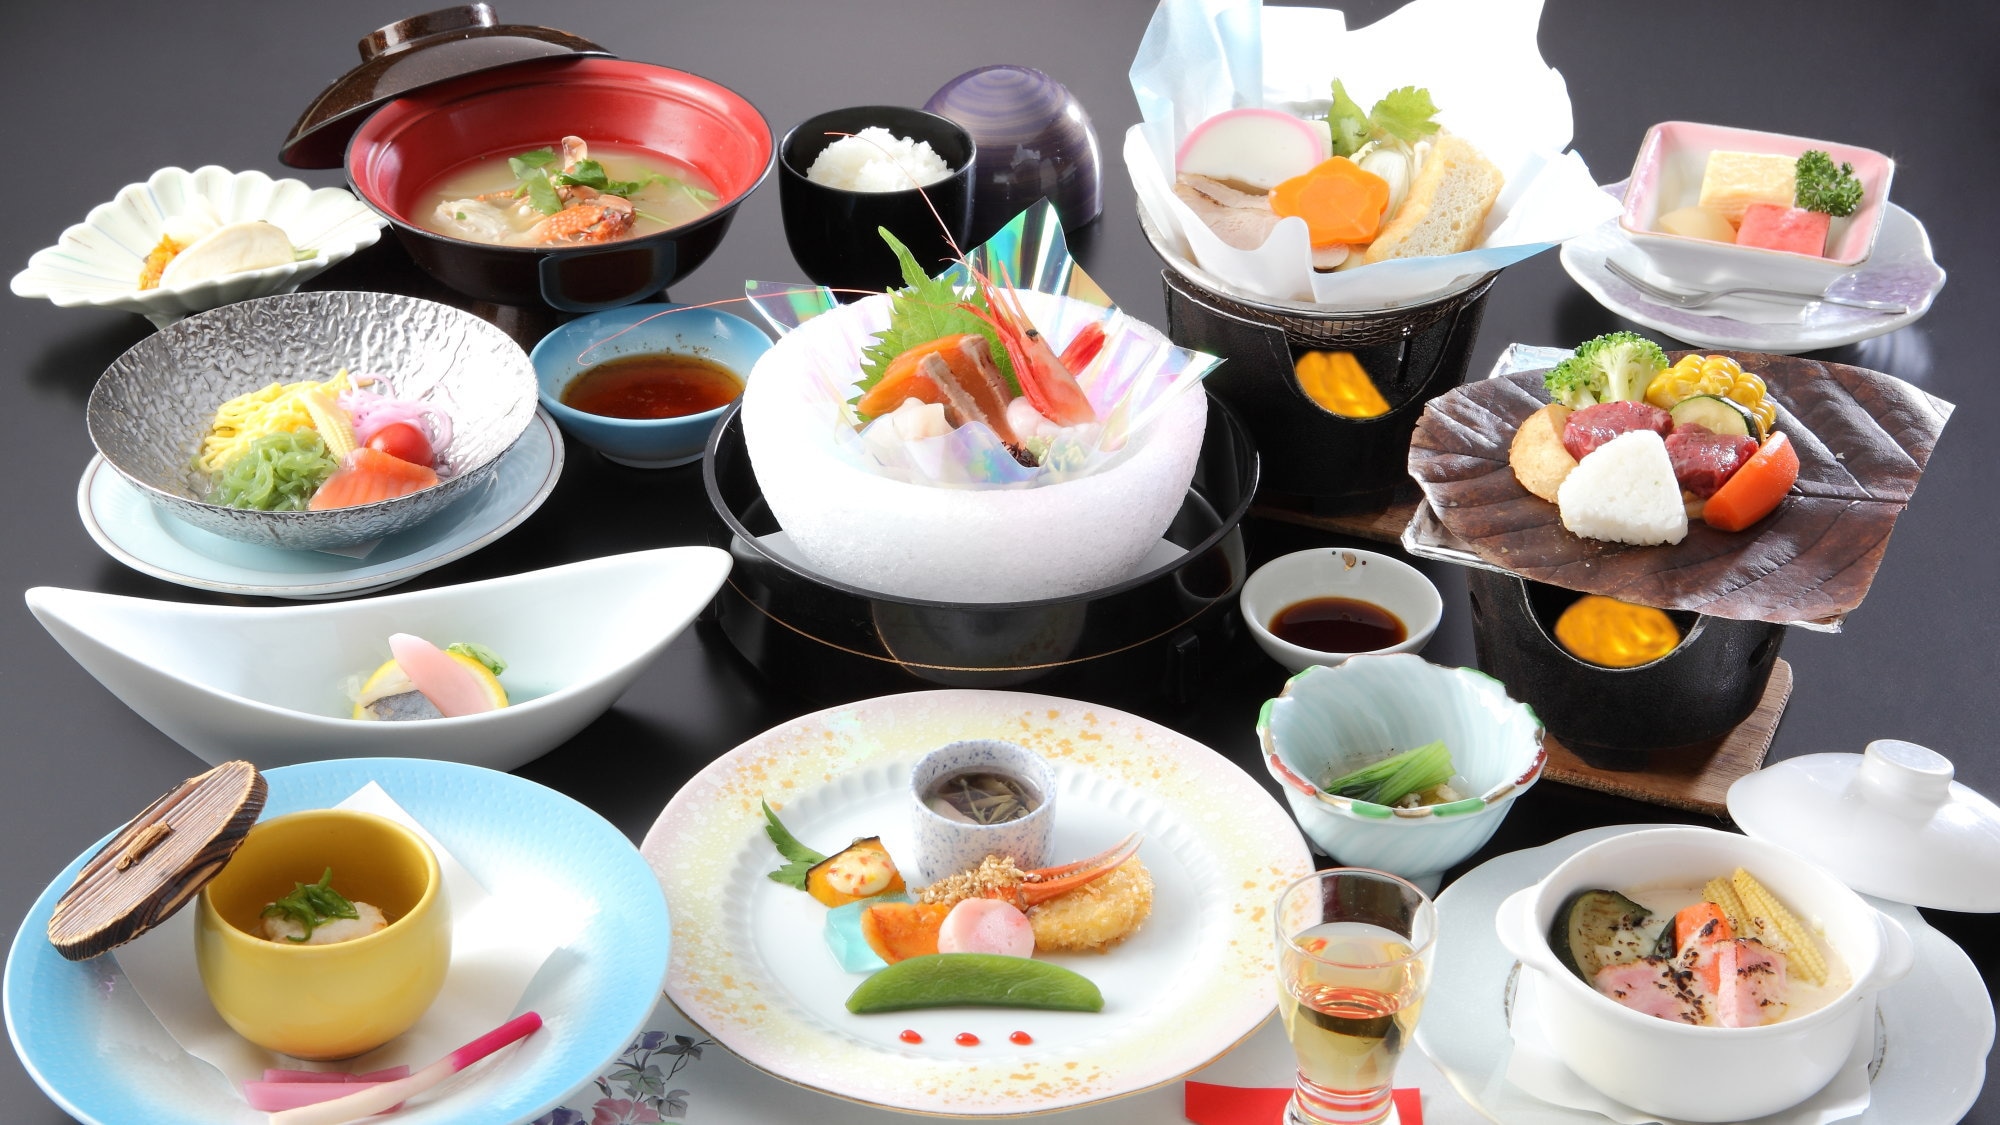 An example of kaiseki cuisine using carefully selected ingredients from Niigata